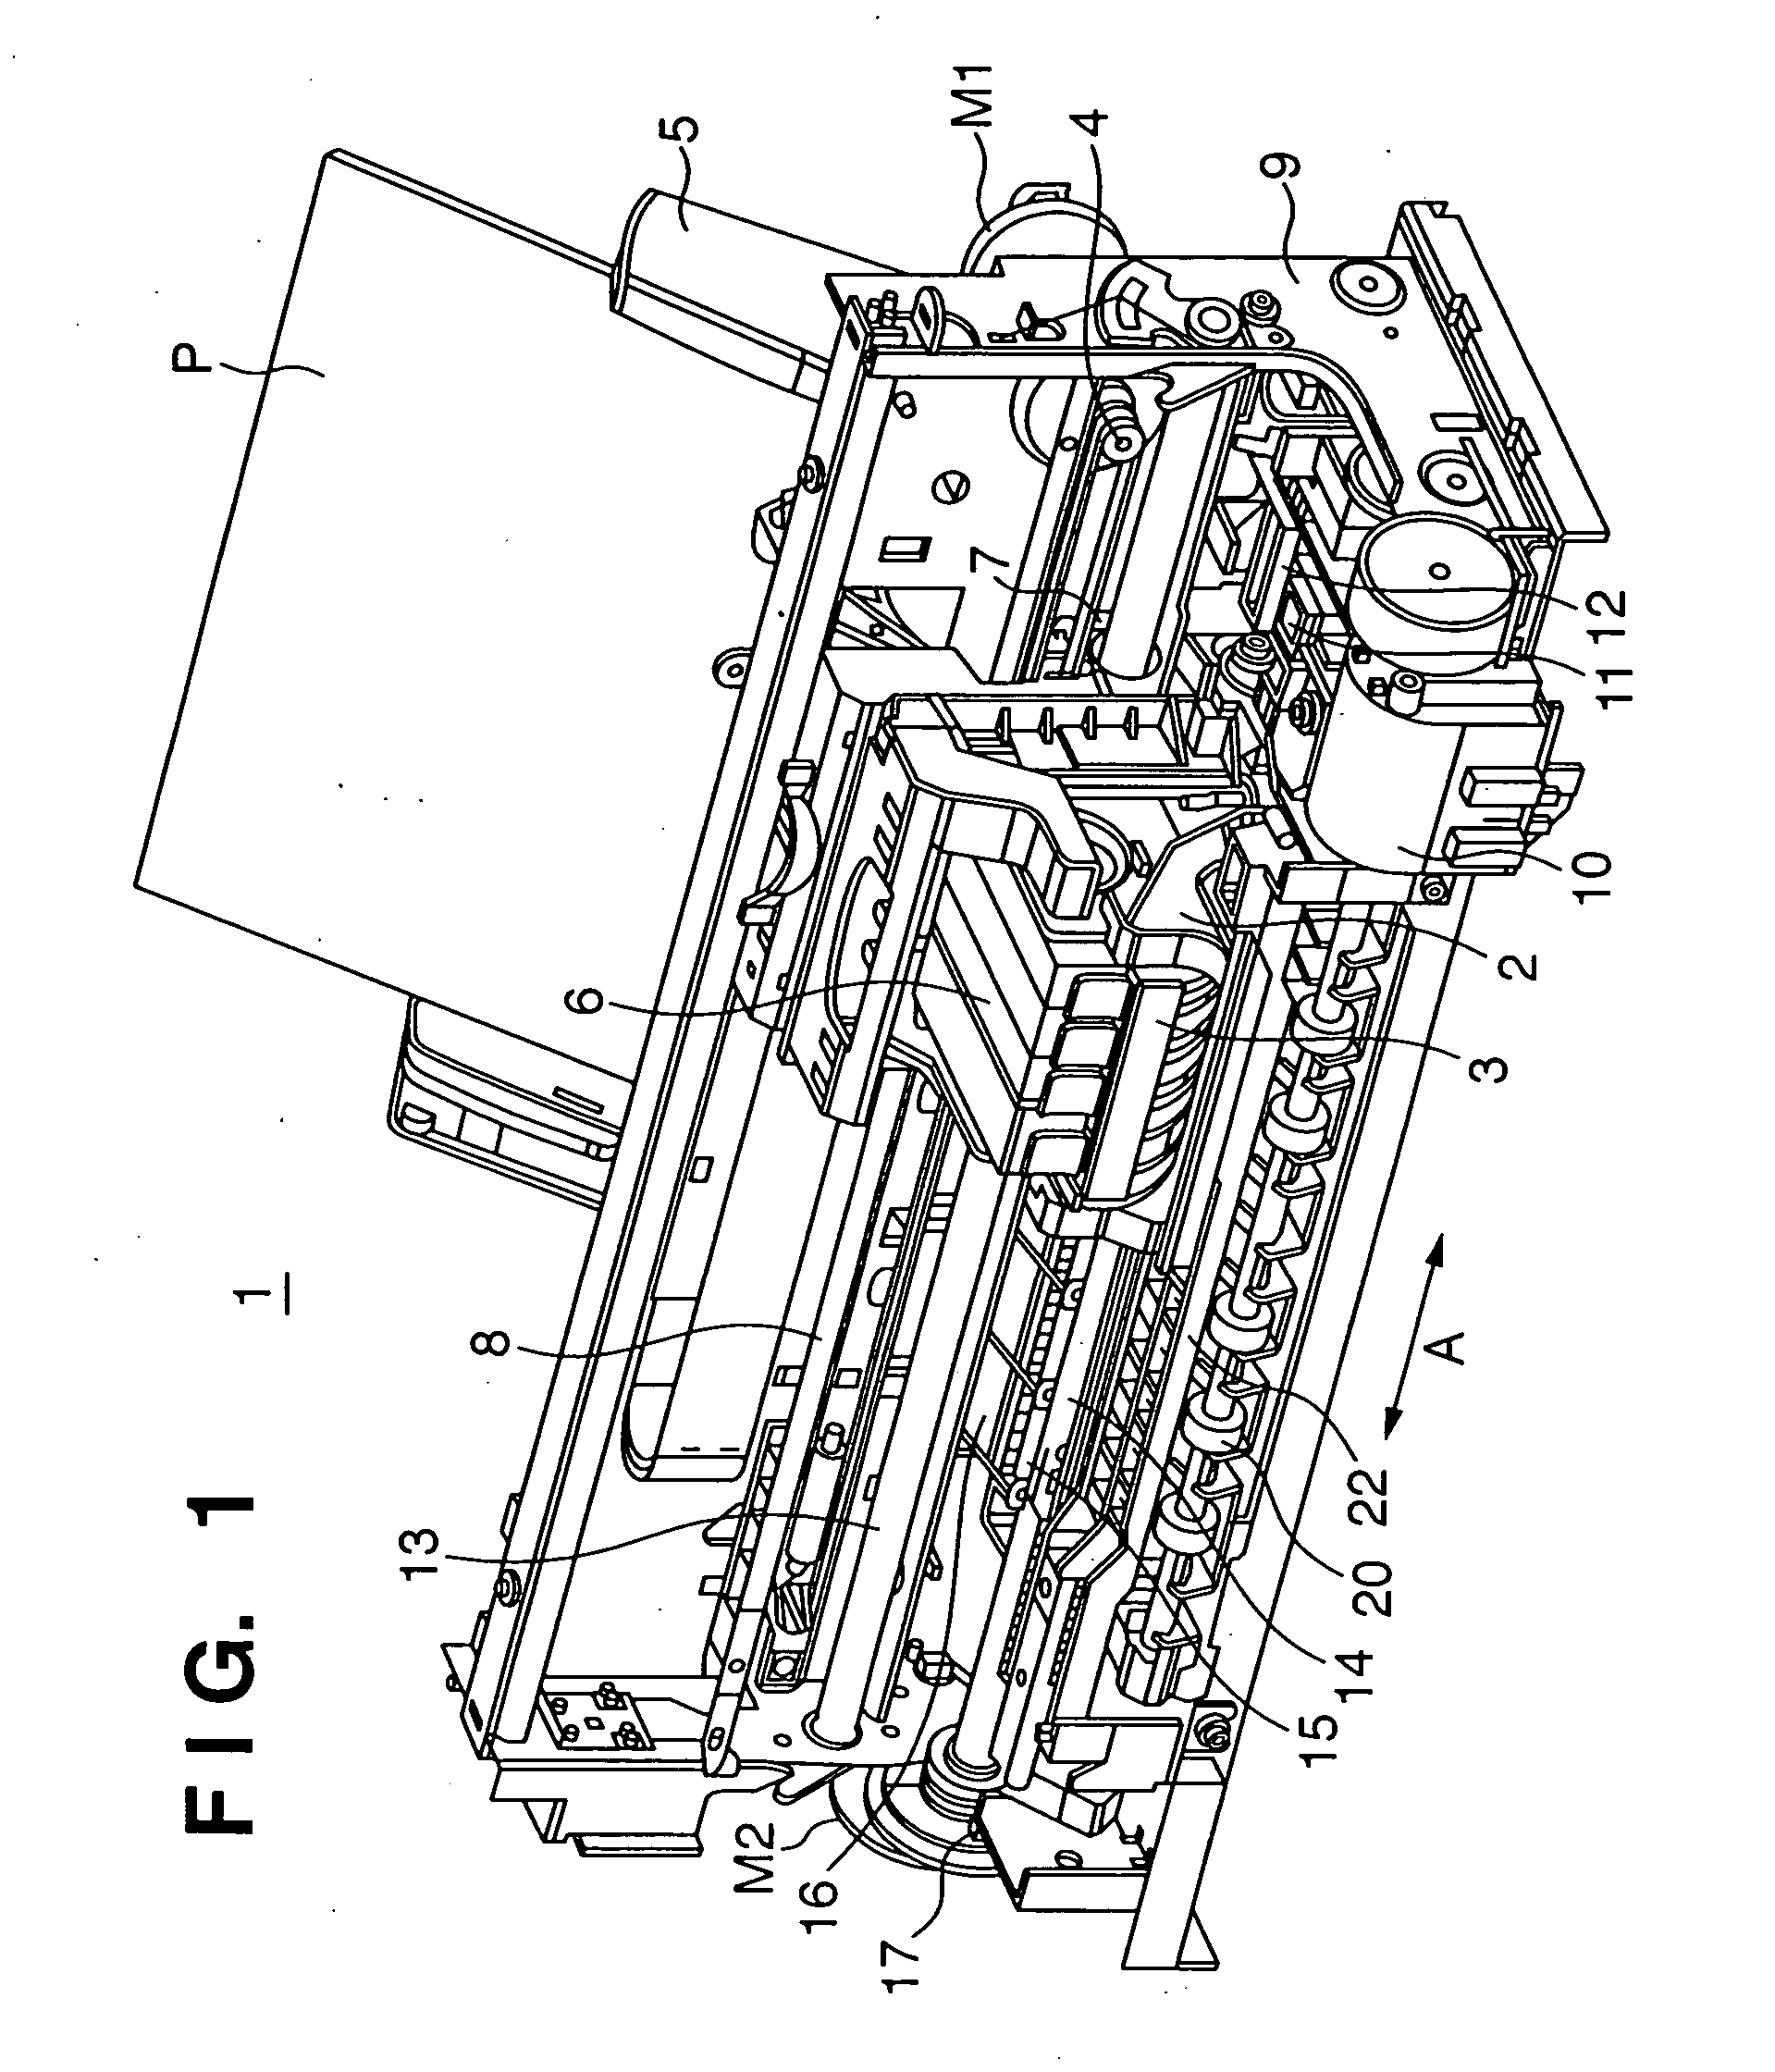 Printhead substrate, printhead using the substrate, head cartridge including the printhead, method of driving the printhead, and printing apparatus using the printhead